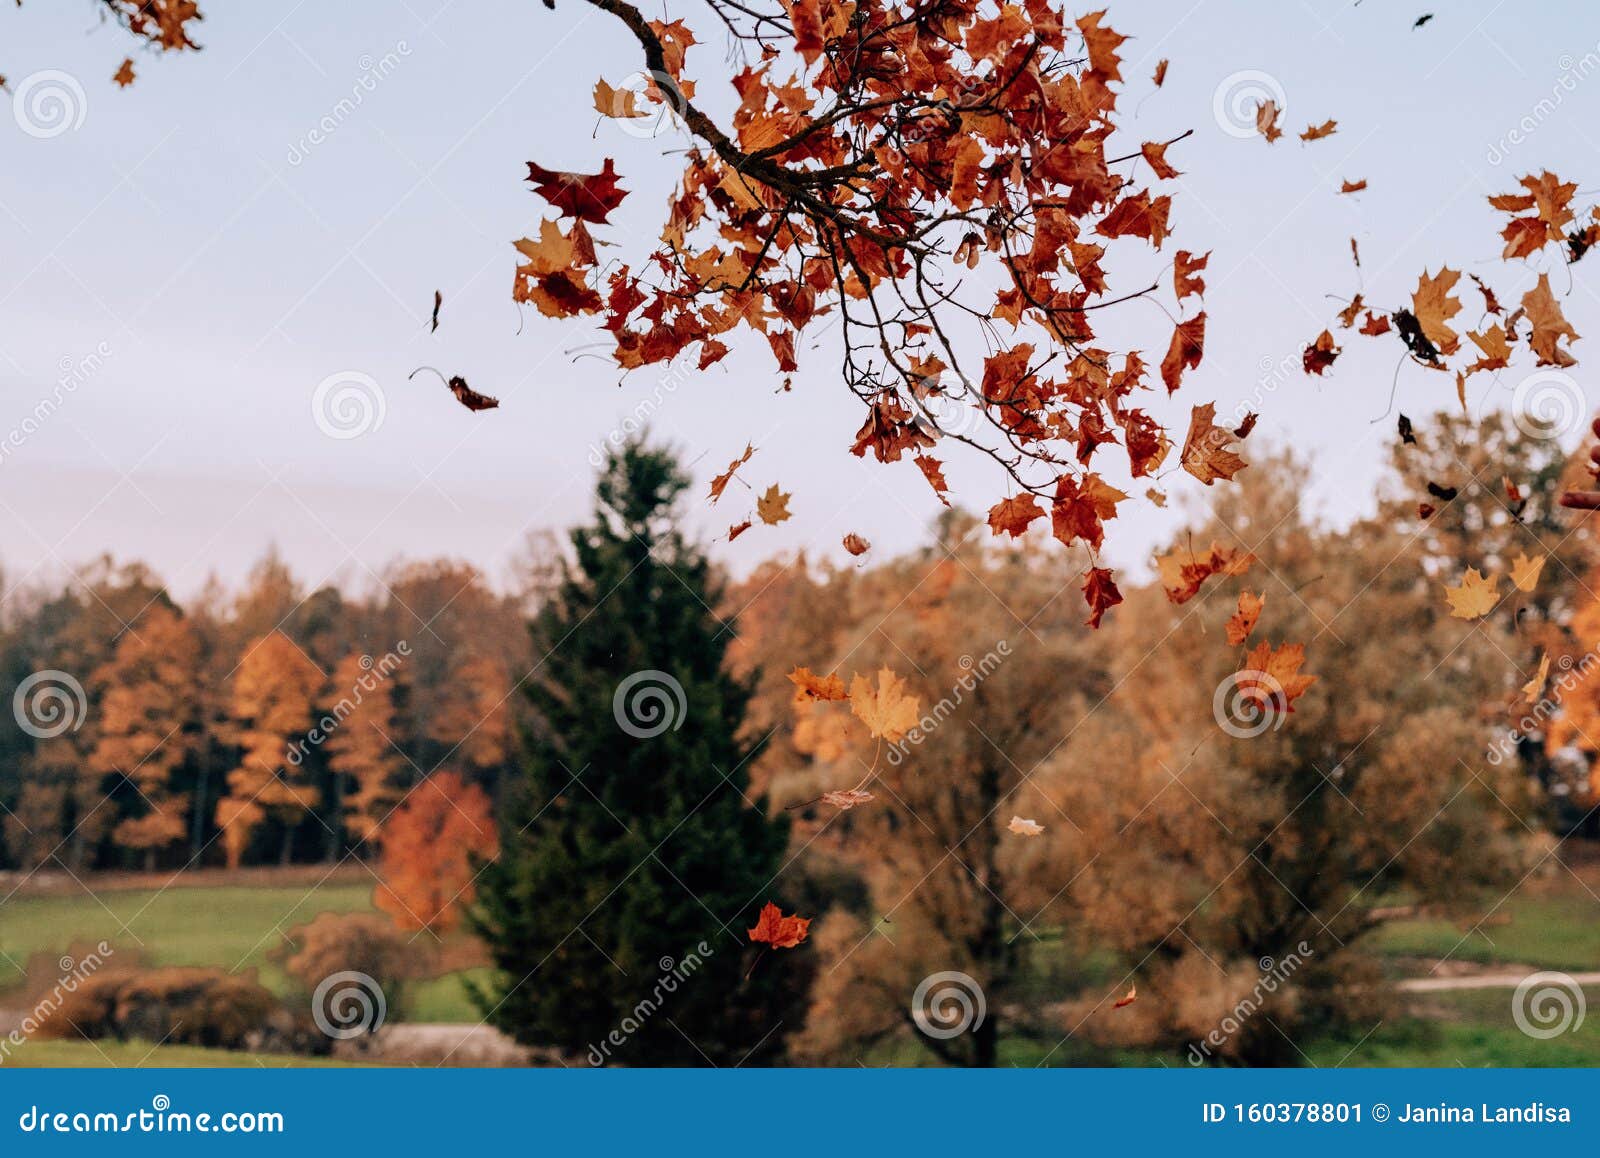 Autumn Maple Leaves Falling From A Tree In A Park With Green Grass And Yellow Leaves Evening Beautiful Foliage Leaves In Stock Image Image Of Forest Flora